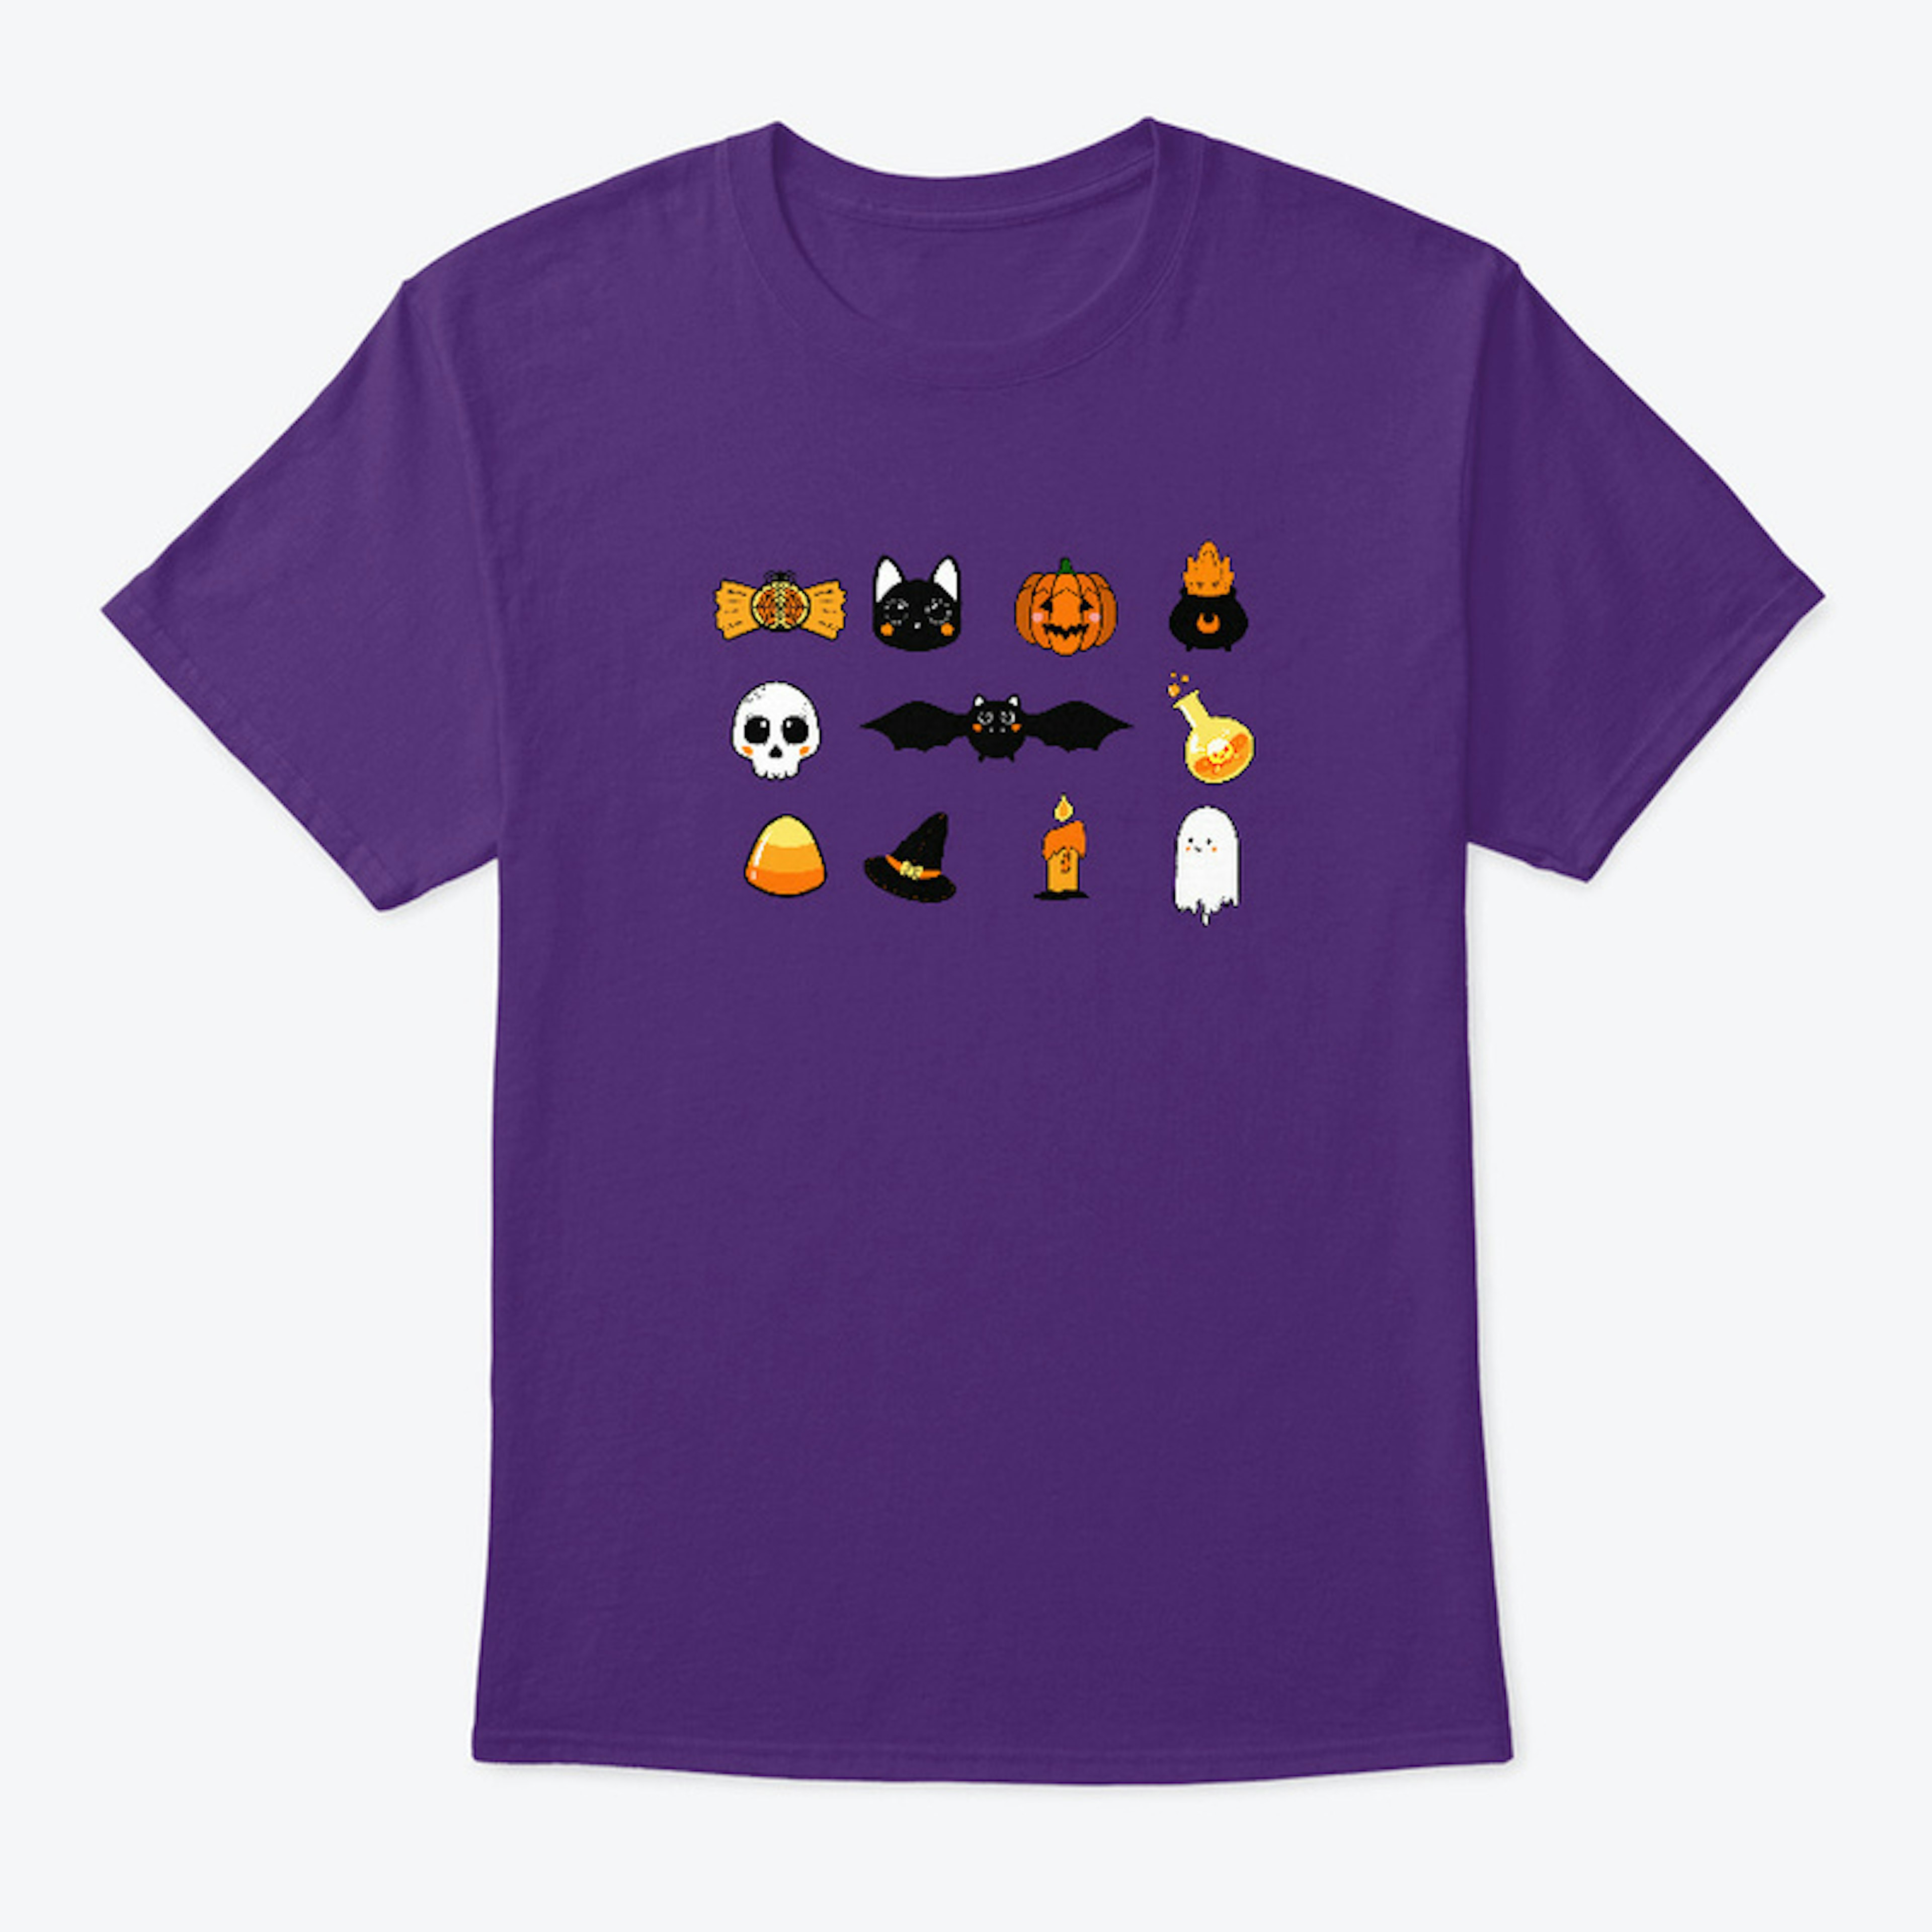 Trick or Treat yourself!